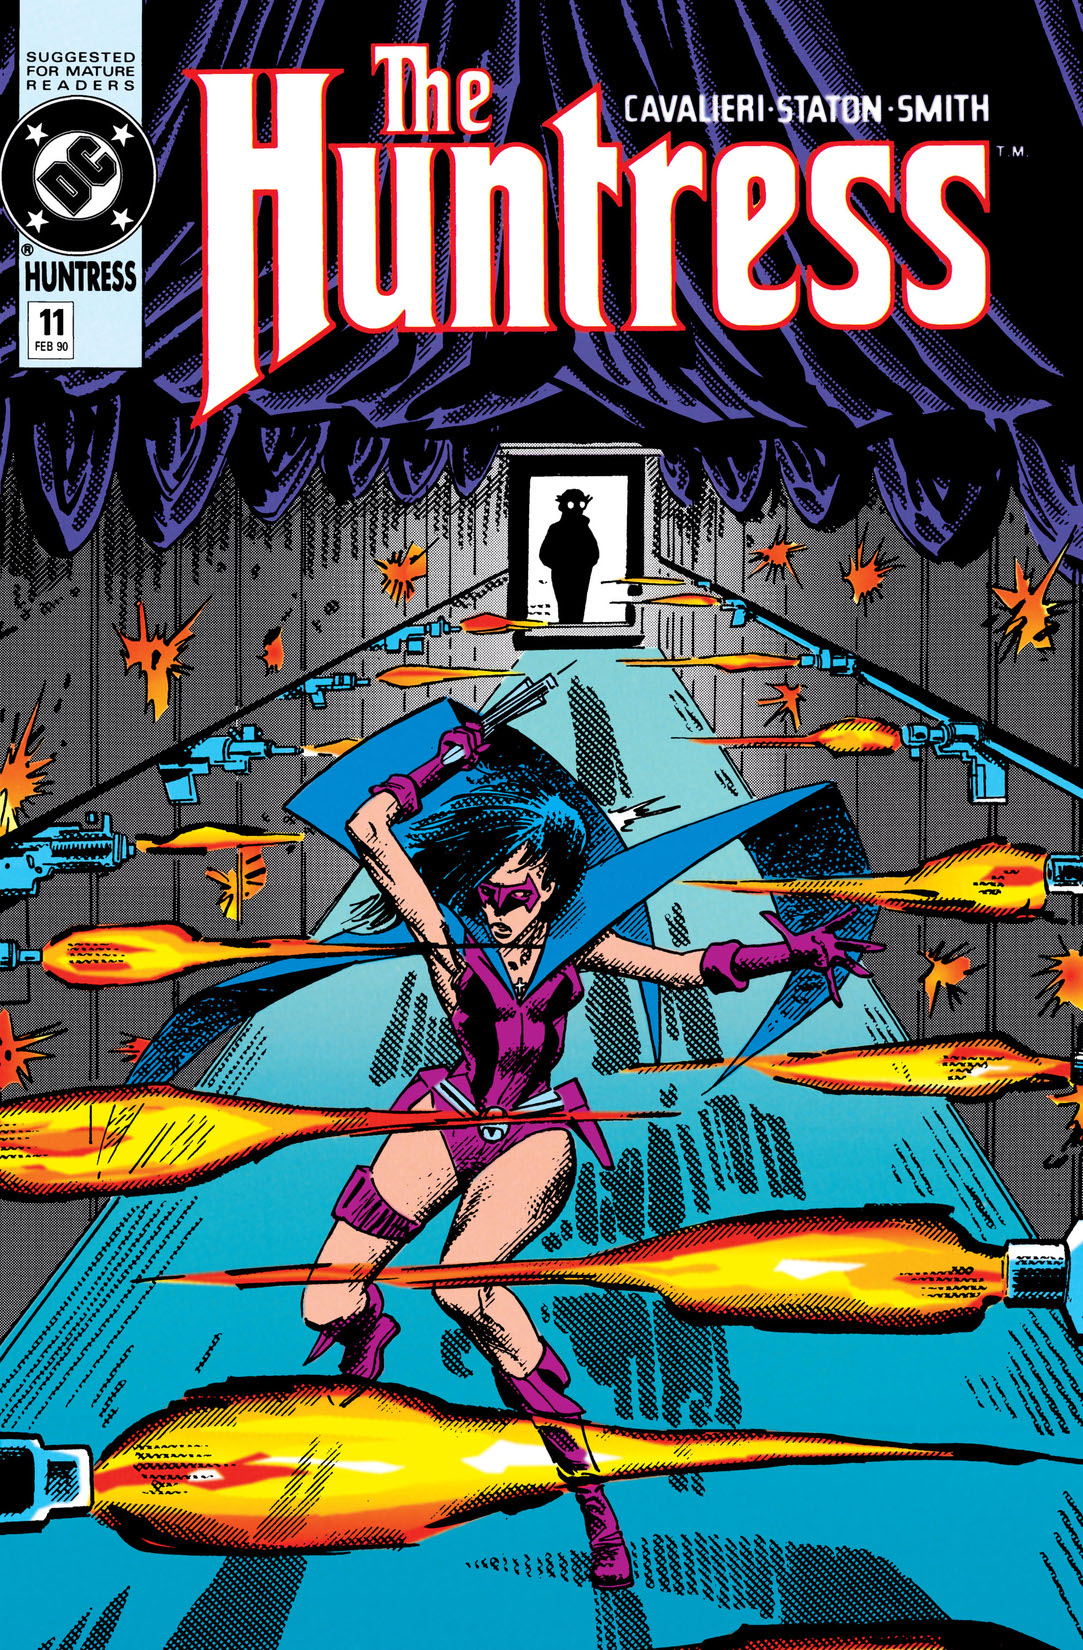 The Huntress (1989-1990) #11 preview images